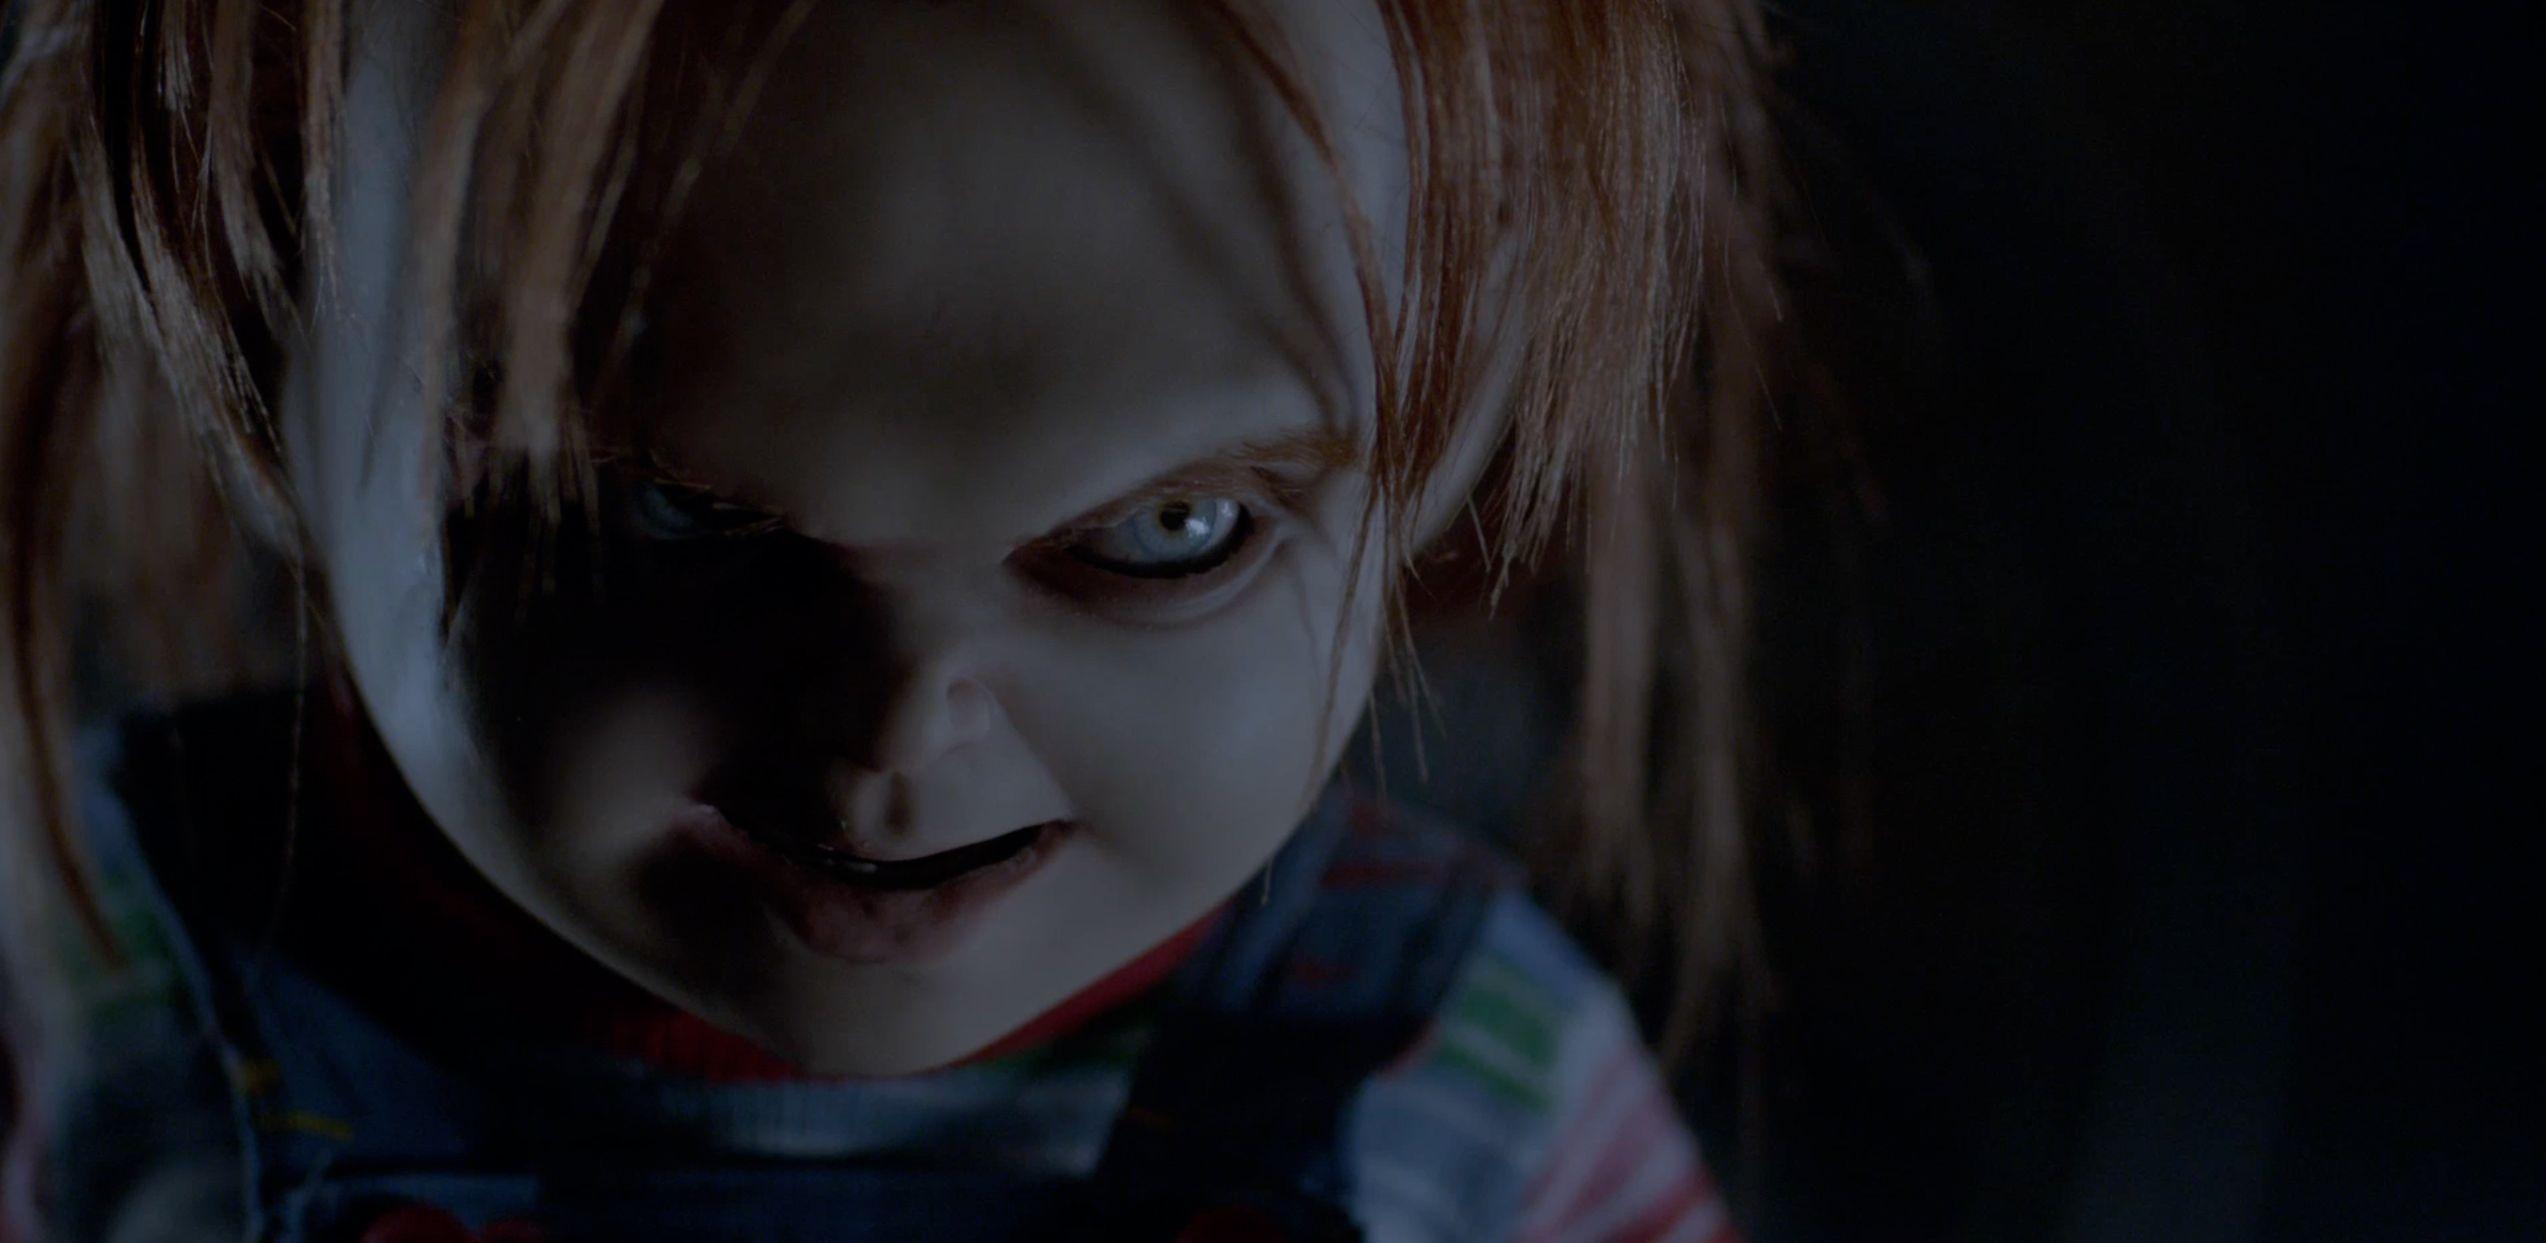 333382 Childs Play Chucky 8K HD  Rare Gallery HD Wallpapers